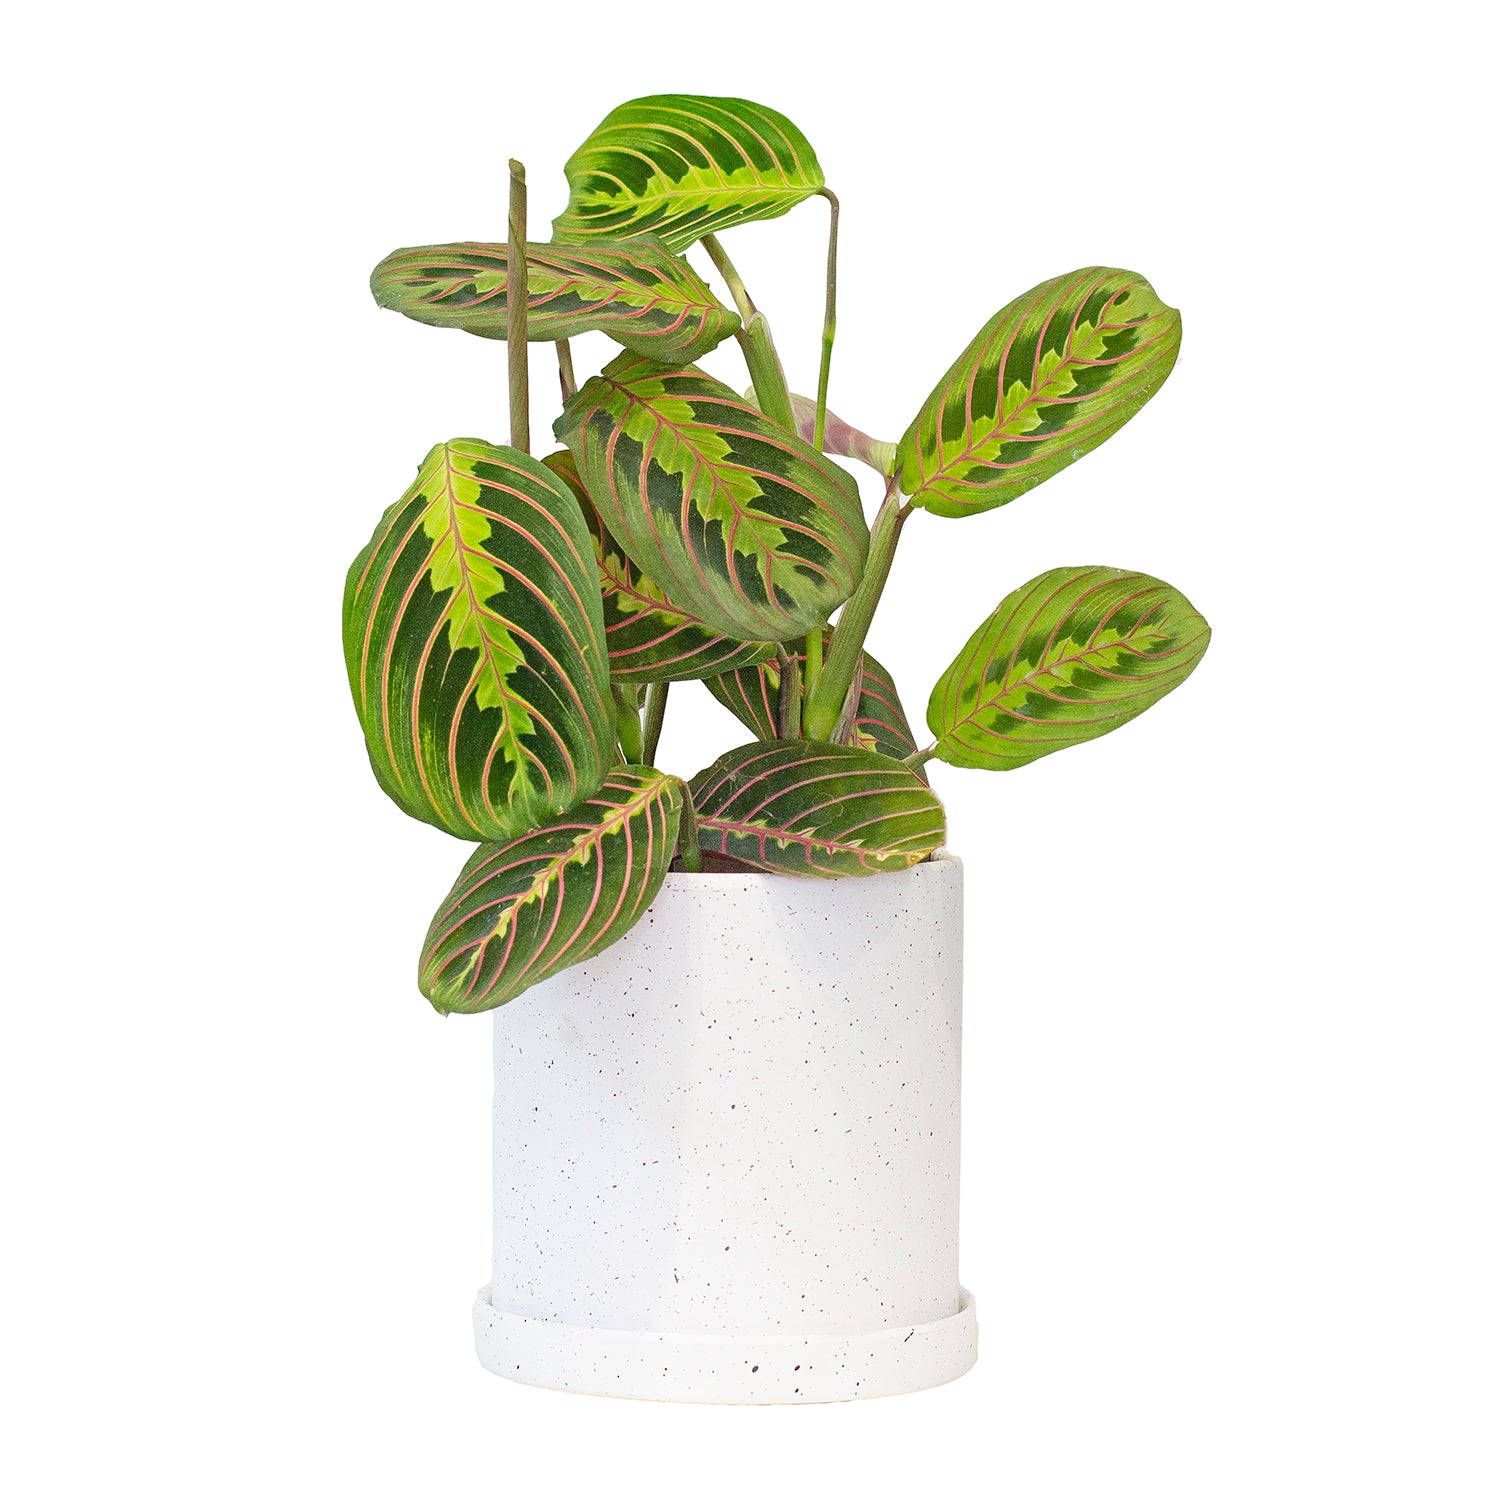 Potted Prayer Plant - Best Quality Easy-Care Houseplant Maranta Tricolor 6” - Buy repotted indoor plant Maranta Red Prayer for delivery at Planteia